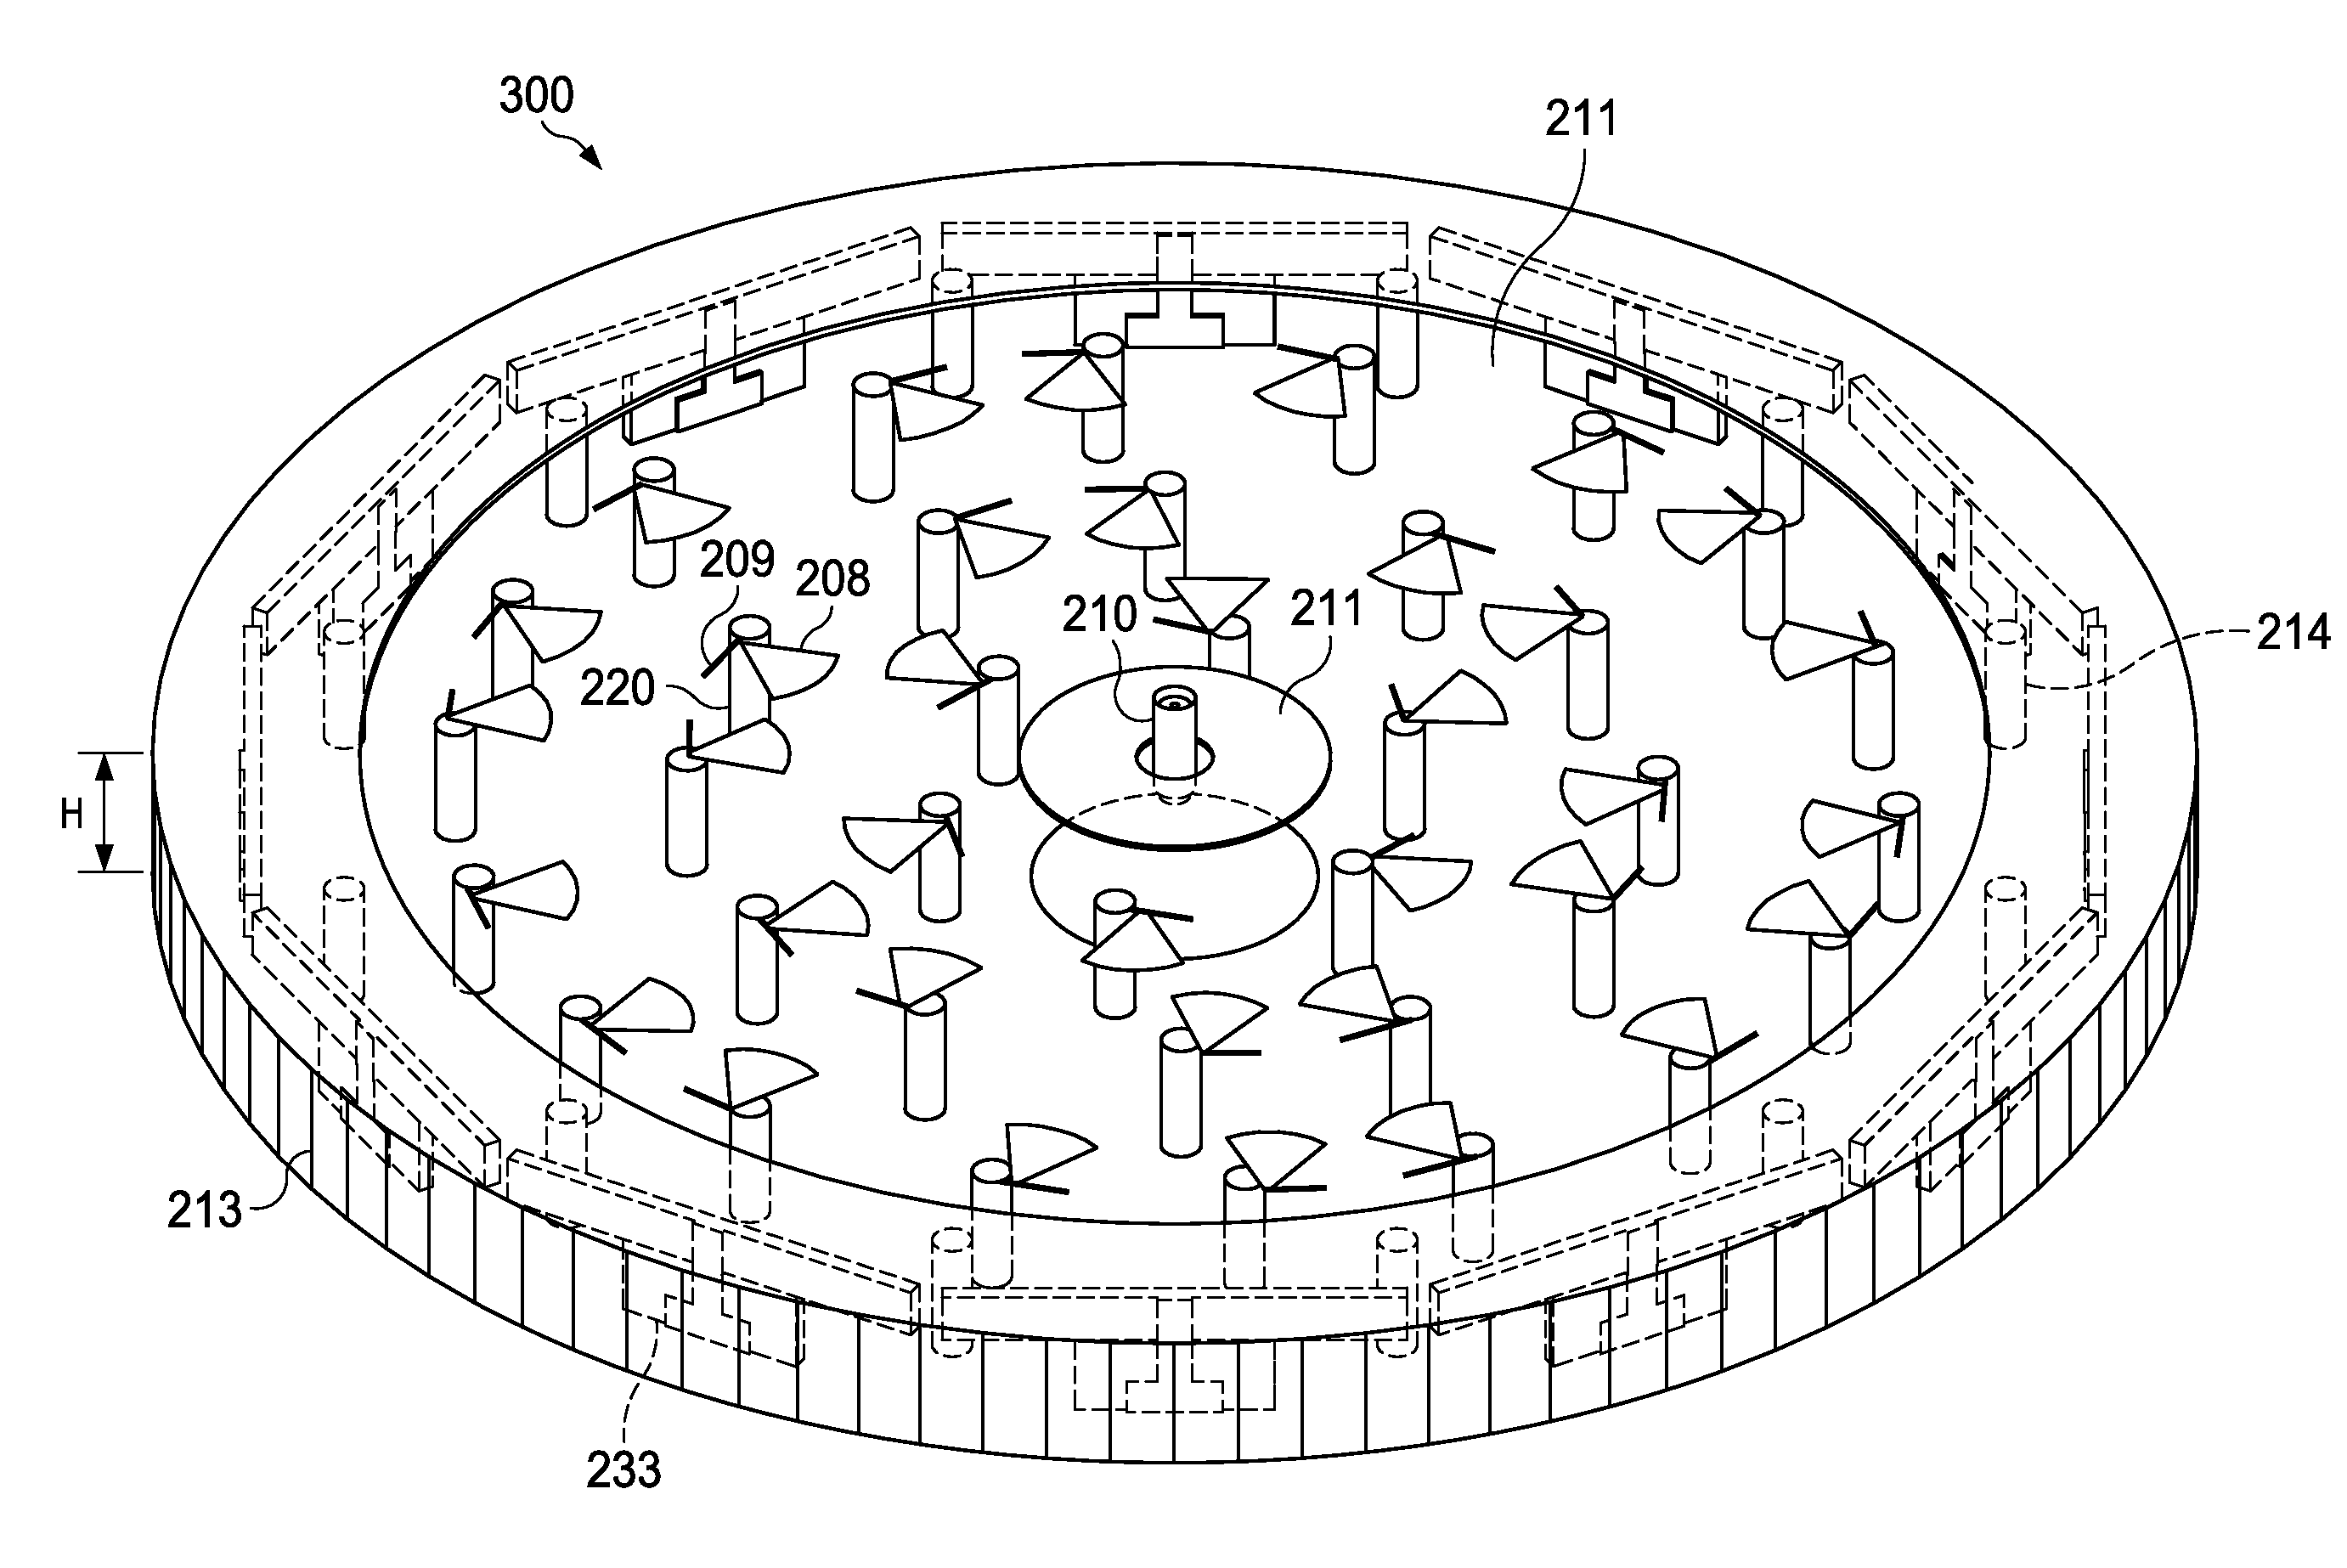 Apparatus and Assembling Method of a Dual Polarized Agile Cylindrical Antenna Array with Reconfigurable Radial Waveguides